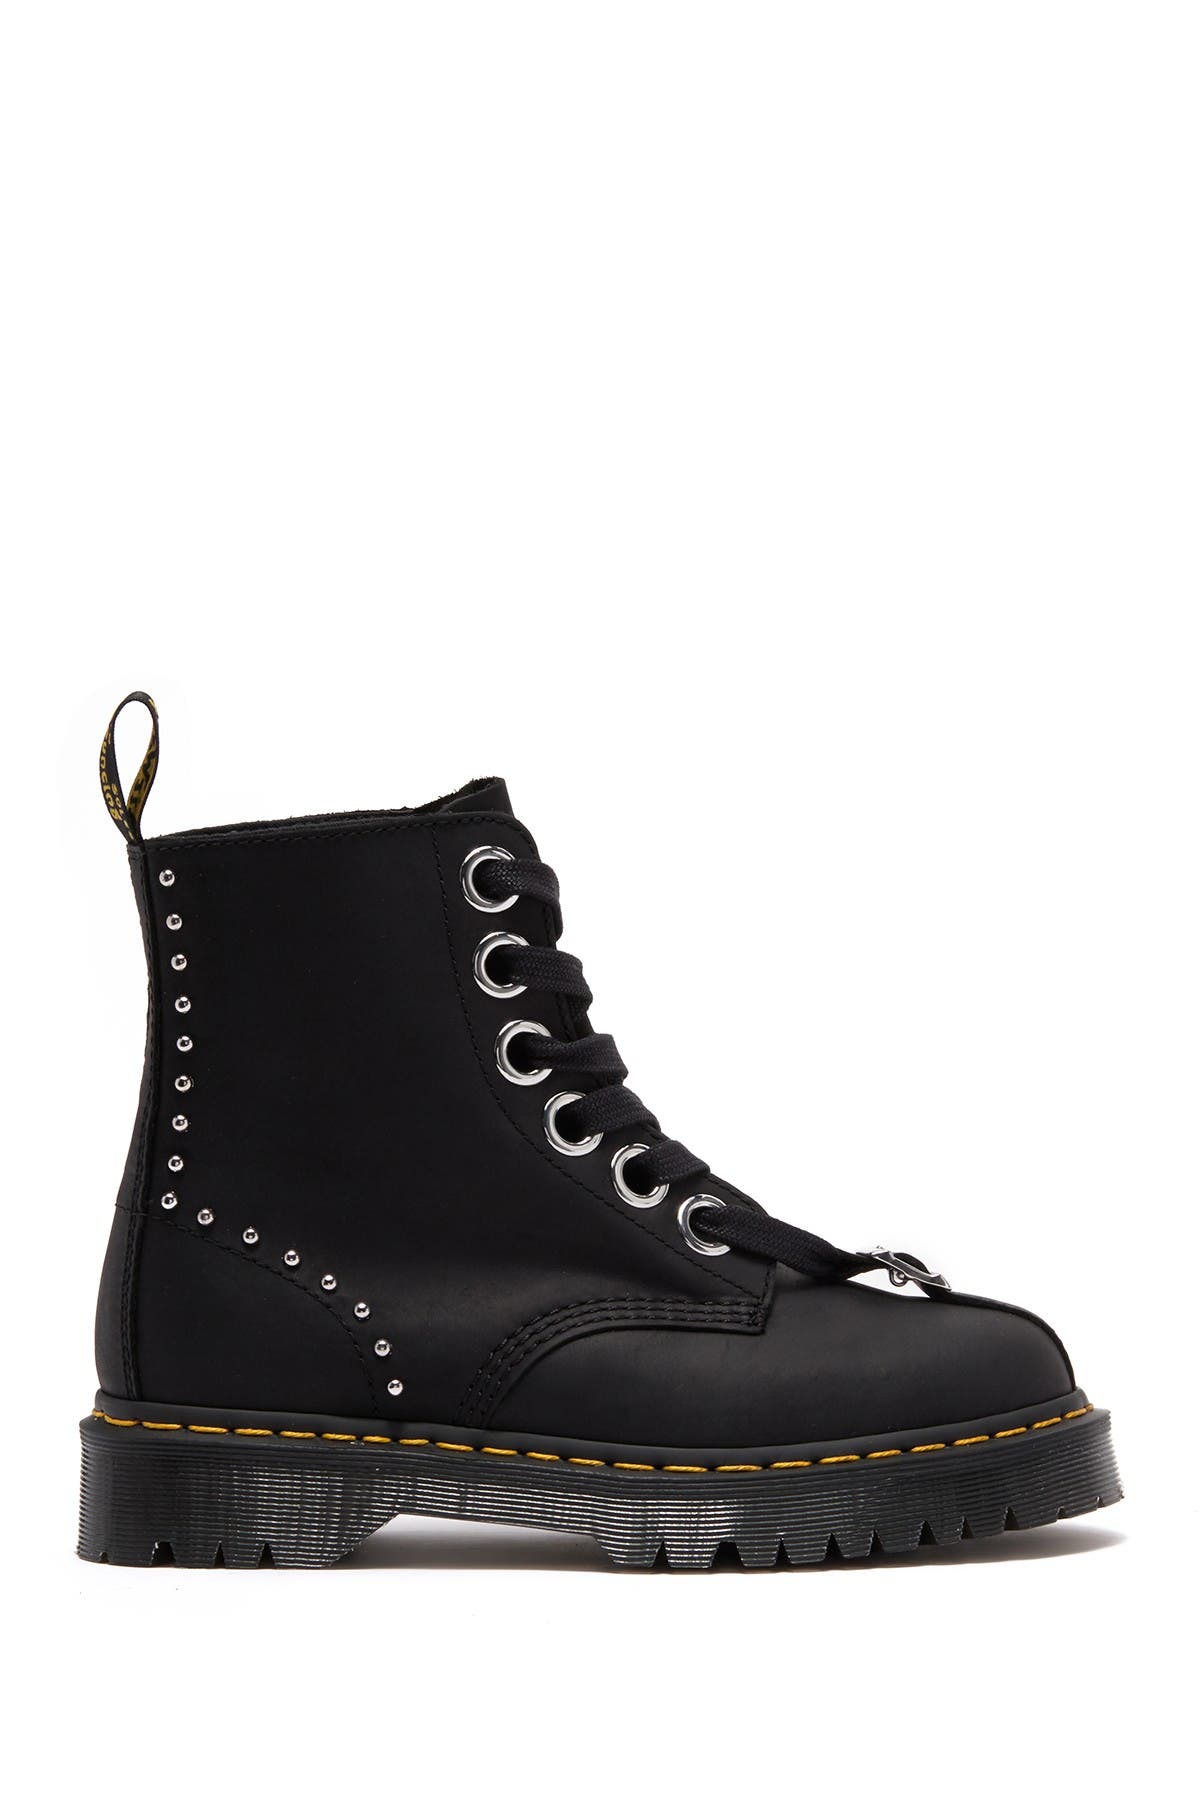 doc martens studded boots